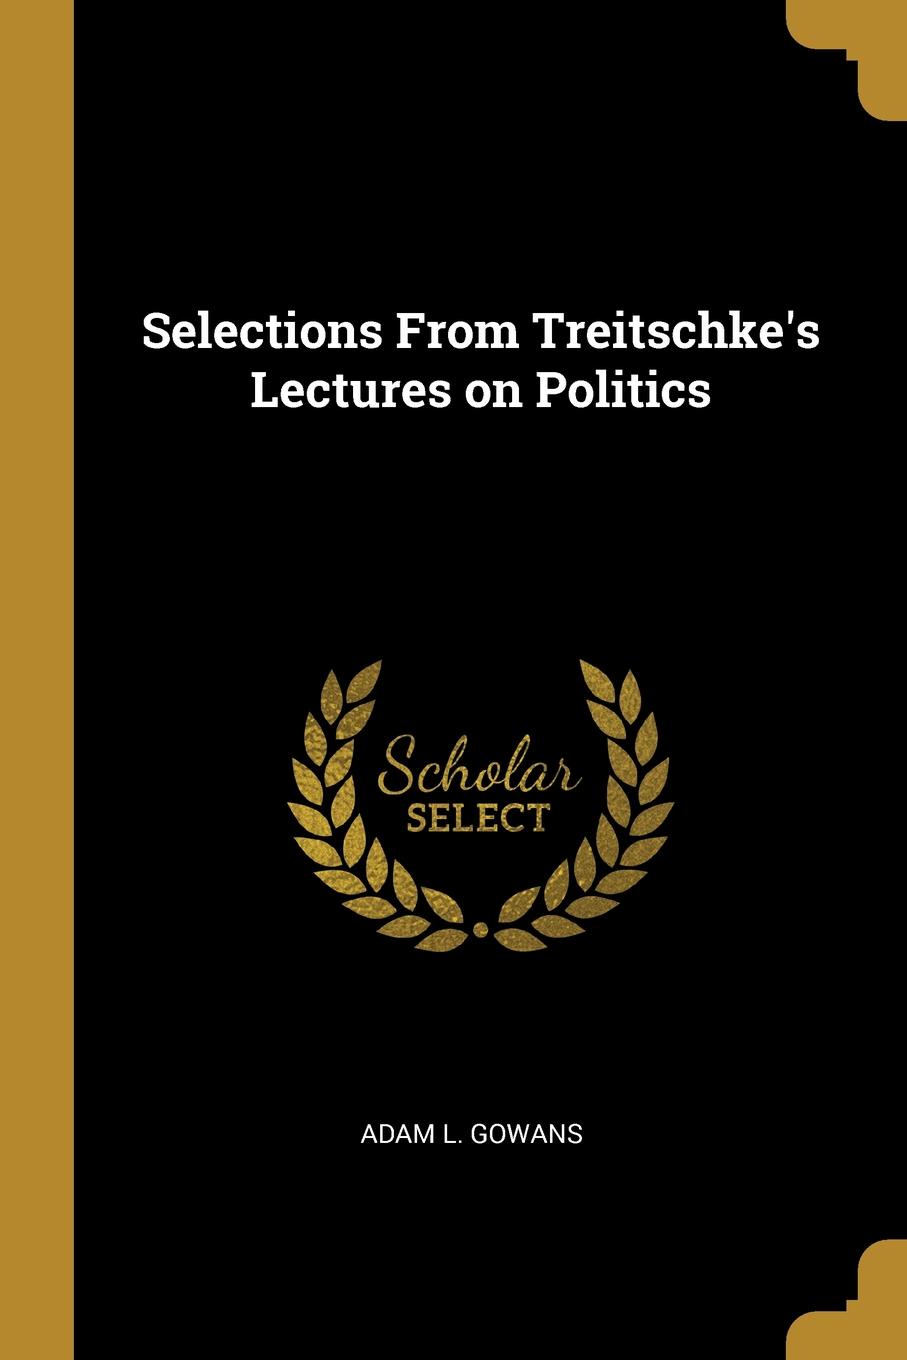 Selections From Treitschke.s Lectures on Politics